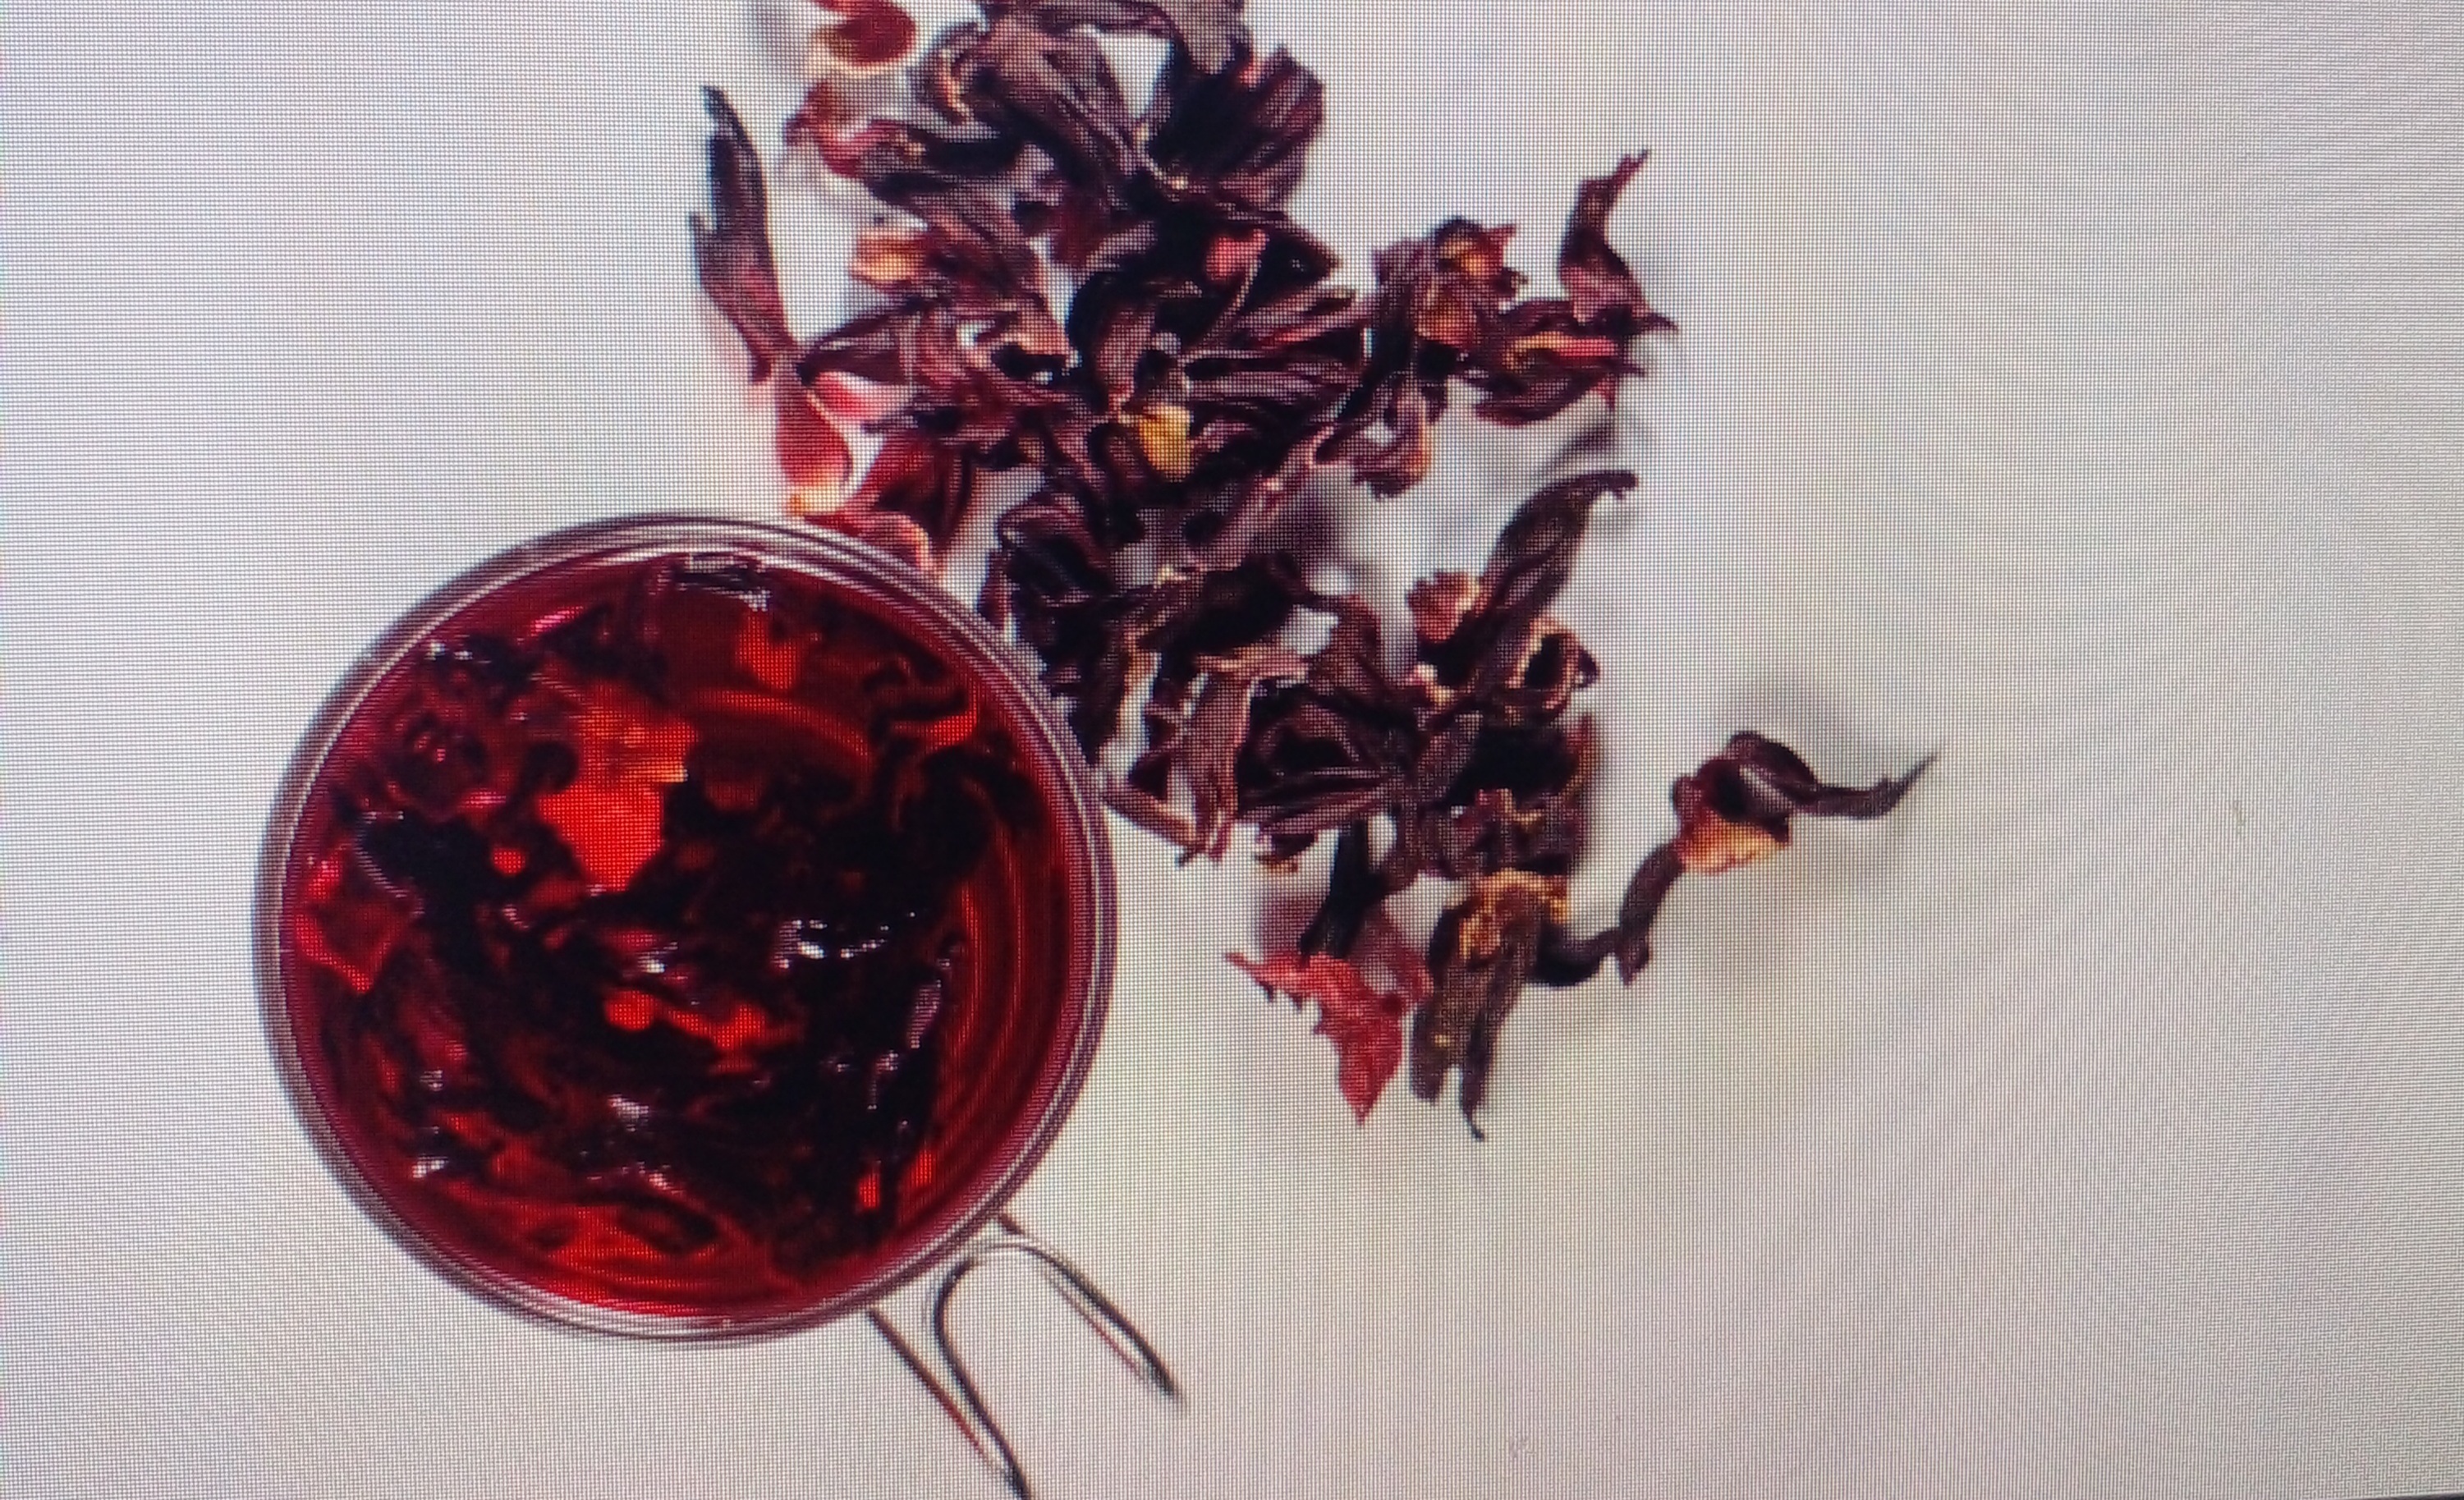 Hibiscus tea benefits It lowers cholesterol lowers blood pressure fights inflammation and promotes weight loss and health clinic 